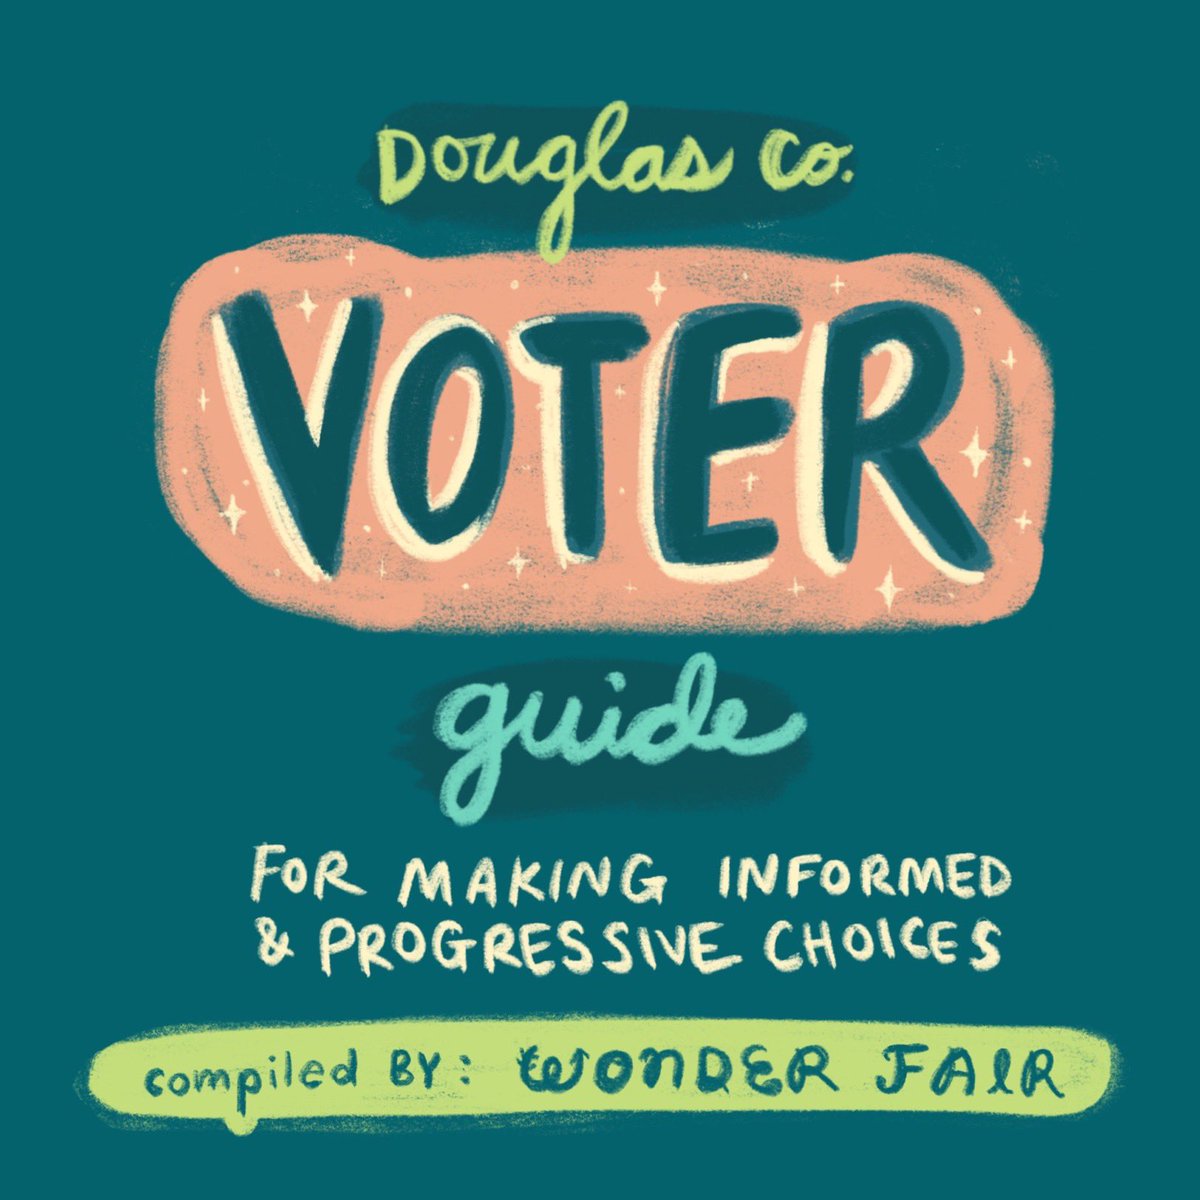 We wrote a longish post about voting over on our Instagram, which you should check out and follow if you like political wonk Stationery & Art Supply stores. (It’s a genre!) TL;DR, here’s a our voting plans in Douglas County, Kansas: